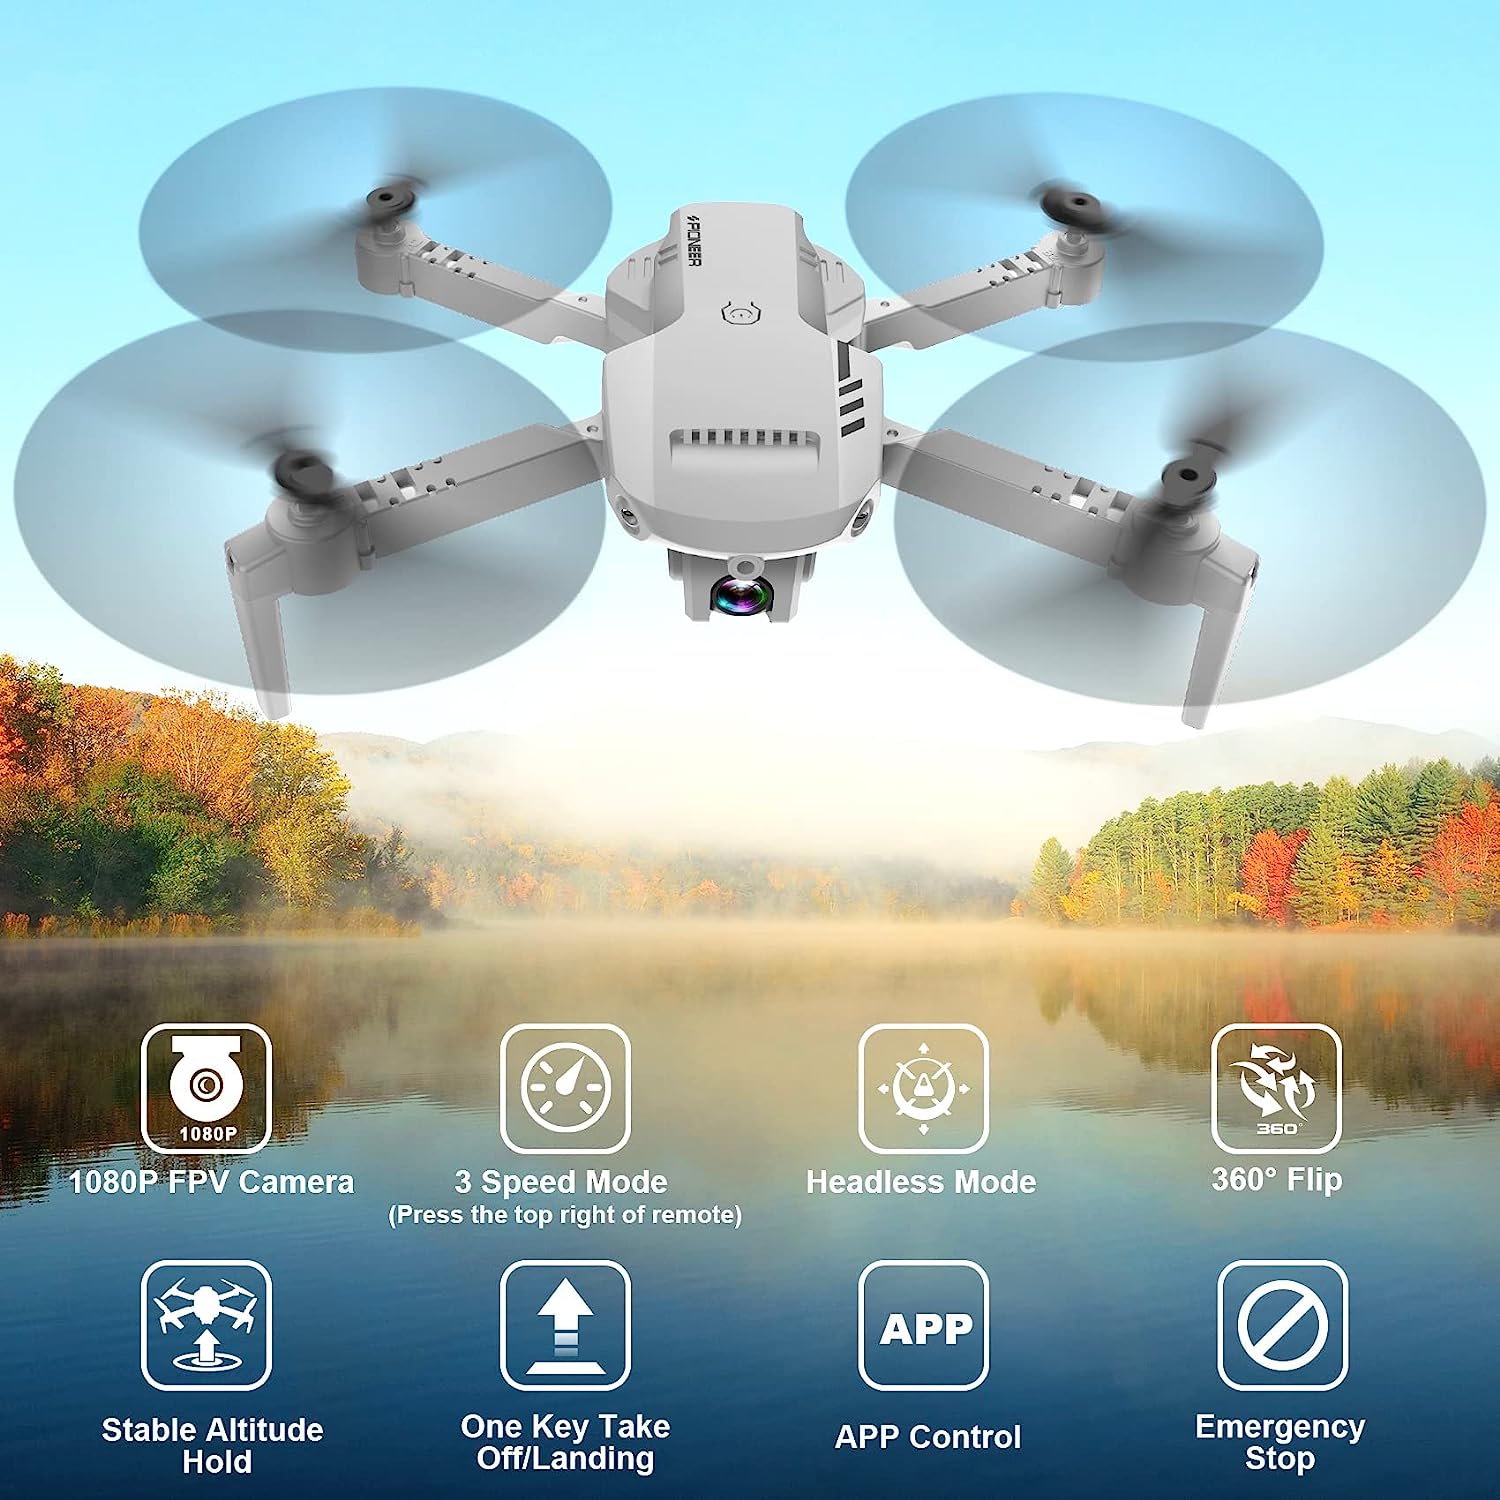 RADCLO Mini Drone with Camera - 1080P HD FPV Foldable Drone with Carrying Scenario, 2 Batteries, 90° Adjustable Lens, One Key Take Off/Land, Altitude Hold, 360° Flip, Toys Gifts for Kids, Adults, beginners, Remote Controlled, Black